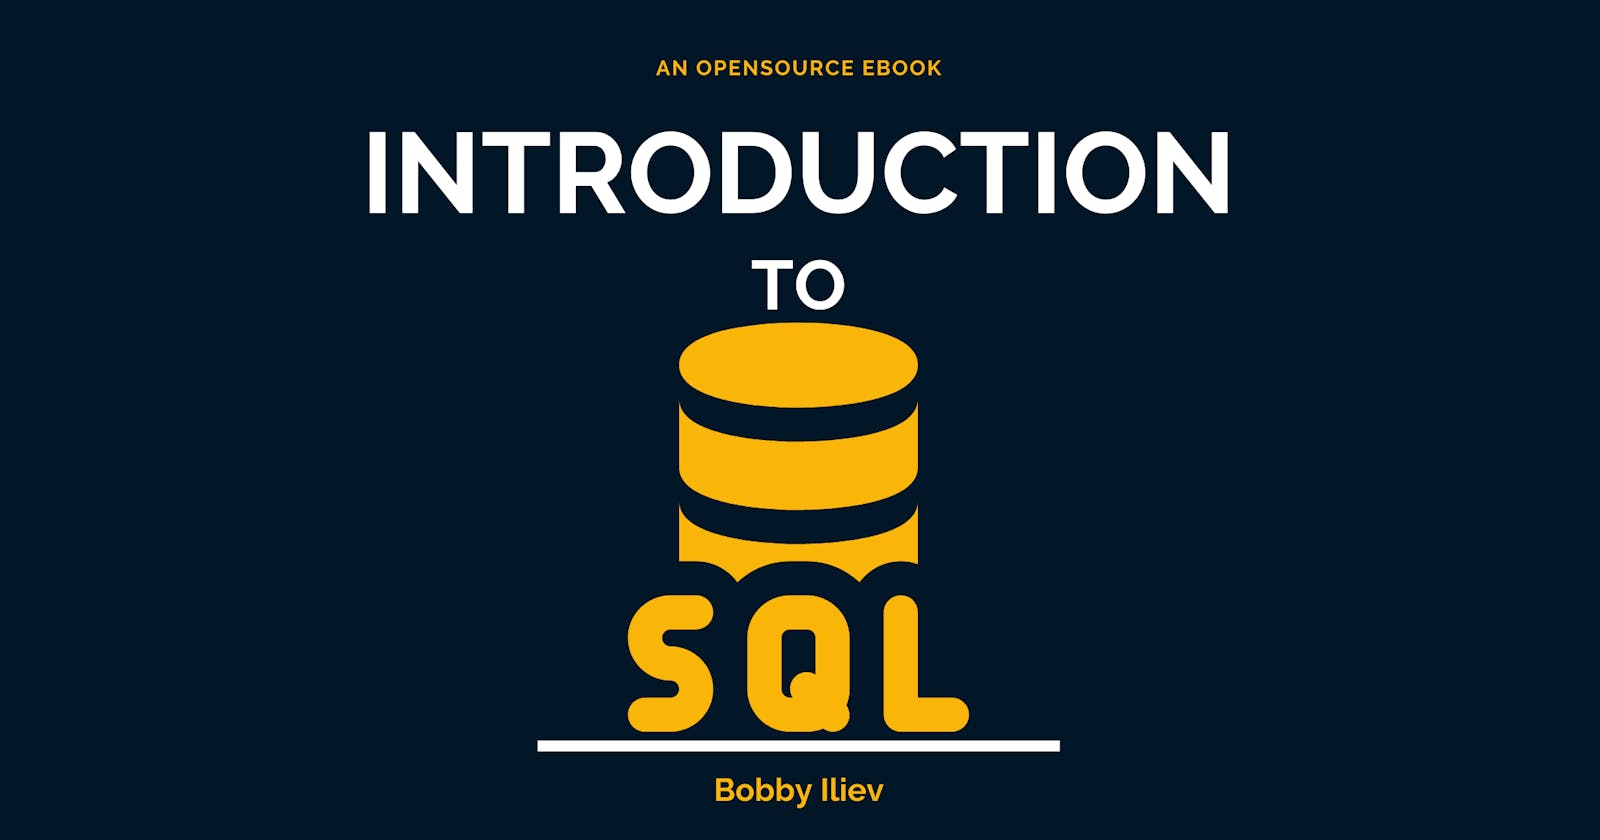 Opensource Introduction to SQL eBook 💡